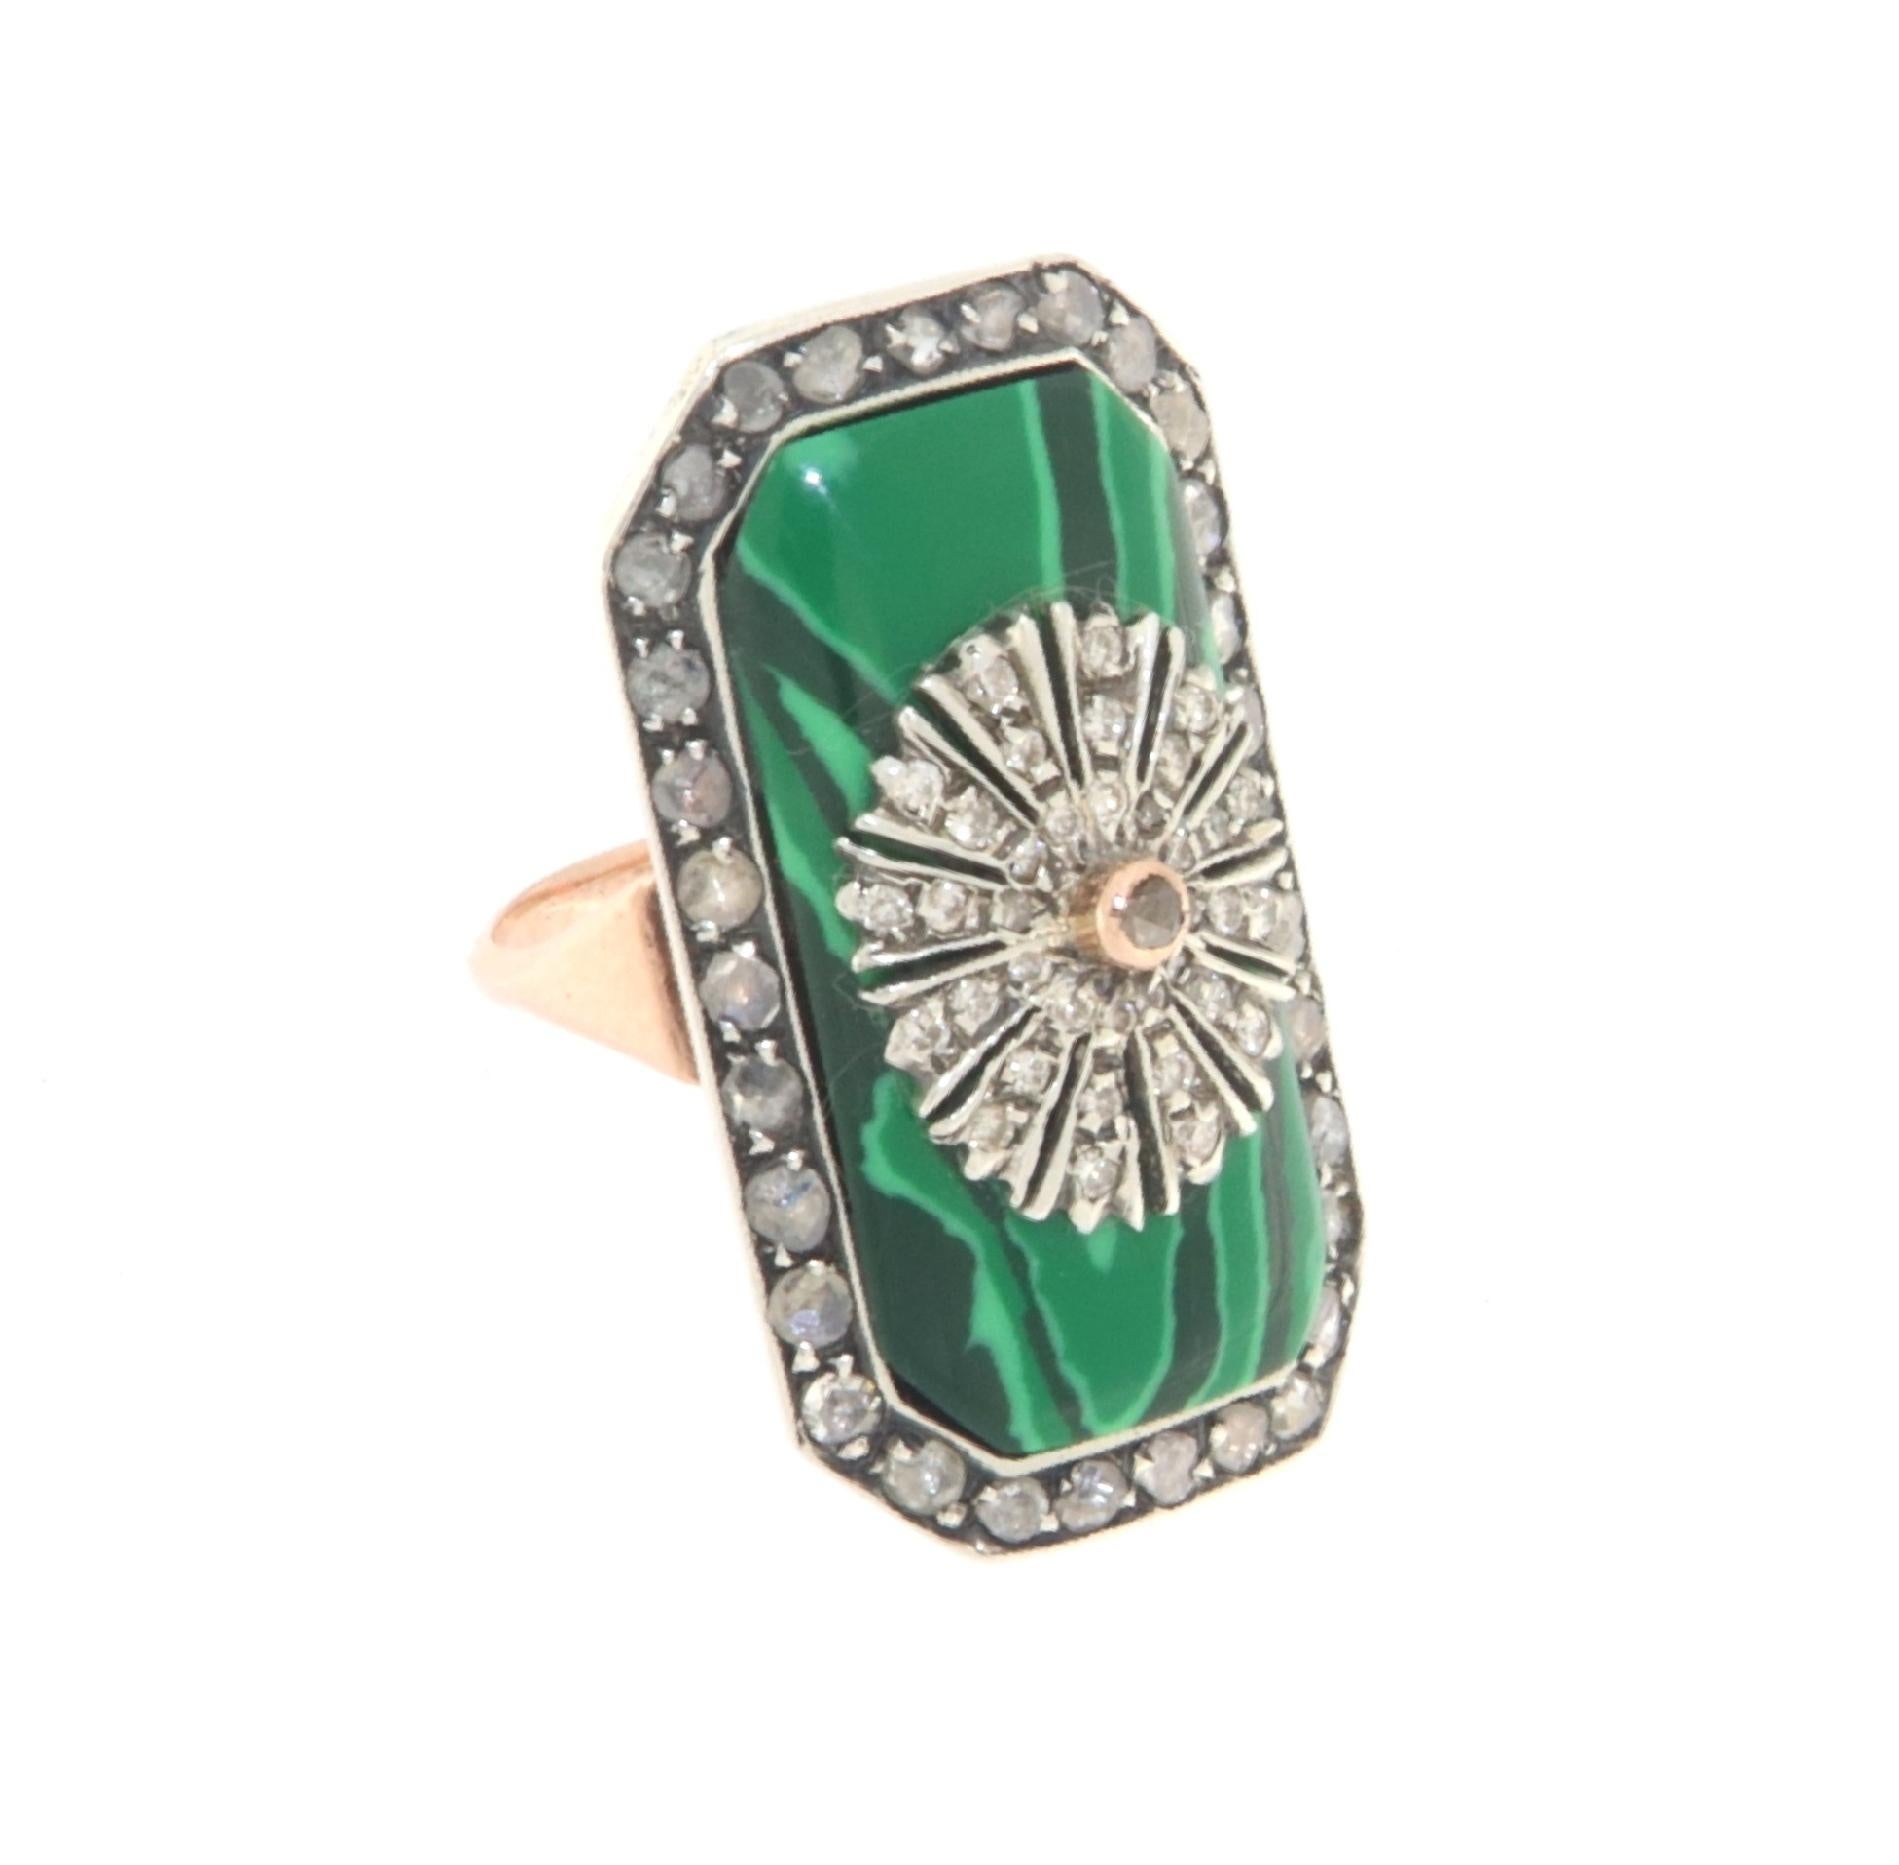 Spectacular ring made of 14 Karat yellow gold and 800 thousandths silver.

The front part of the ring is decorated with a silver frame where antique rose-cut diamonds are set which contains a splendid malachite on which another decoration with